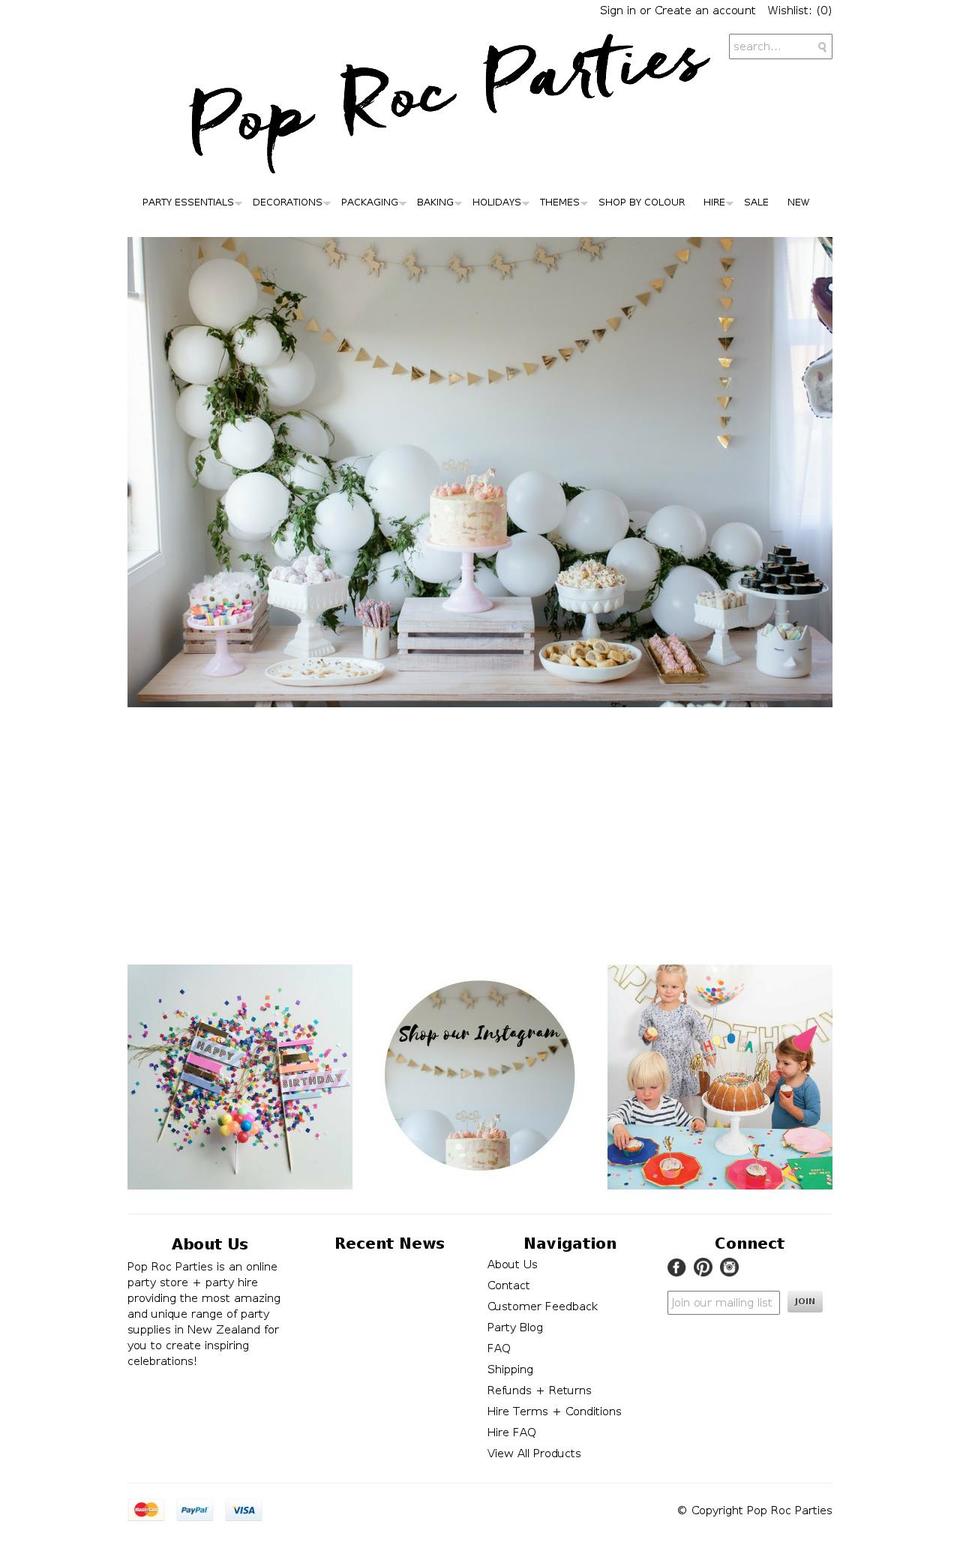 North Shopify theme site example poprocparties.co.nz